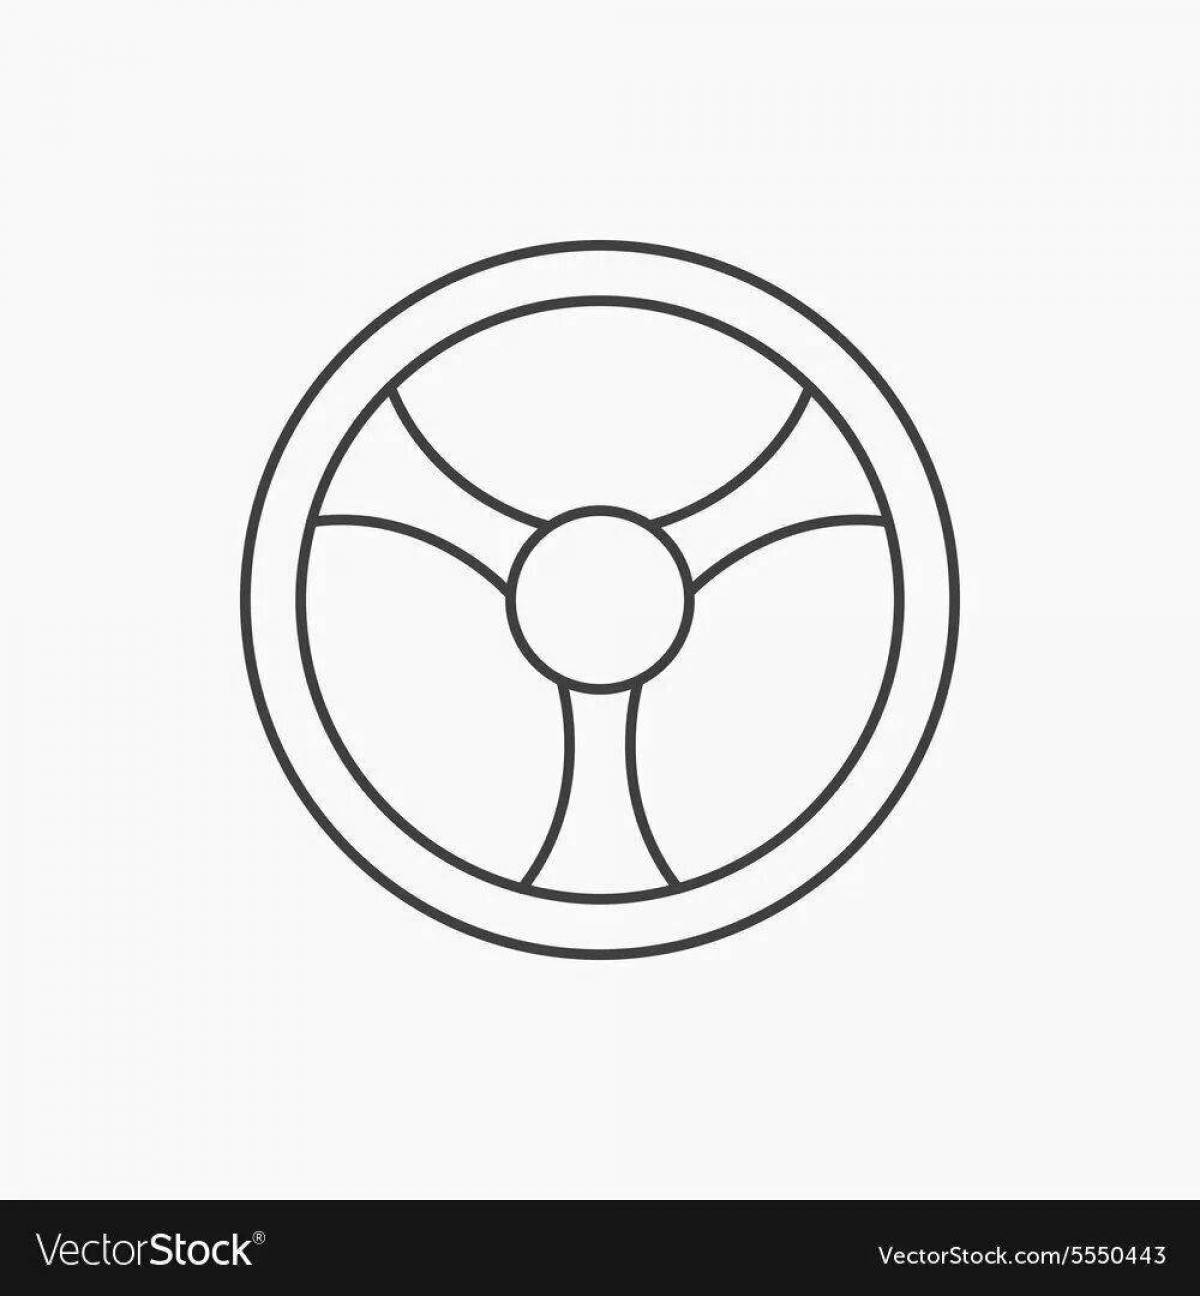 Funny steering wheel coloring book for kids